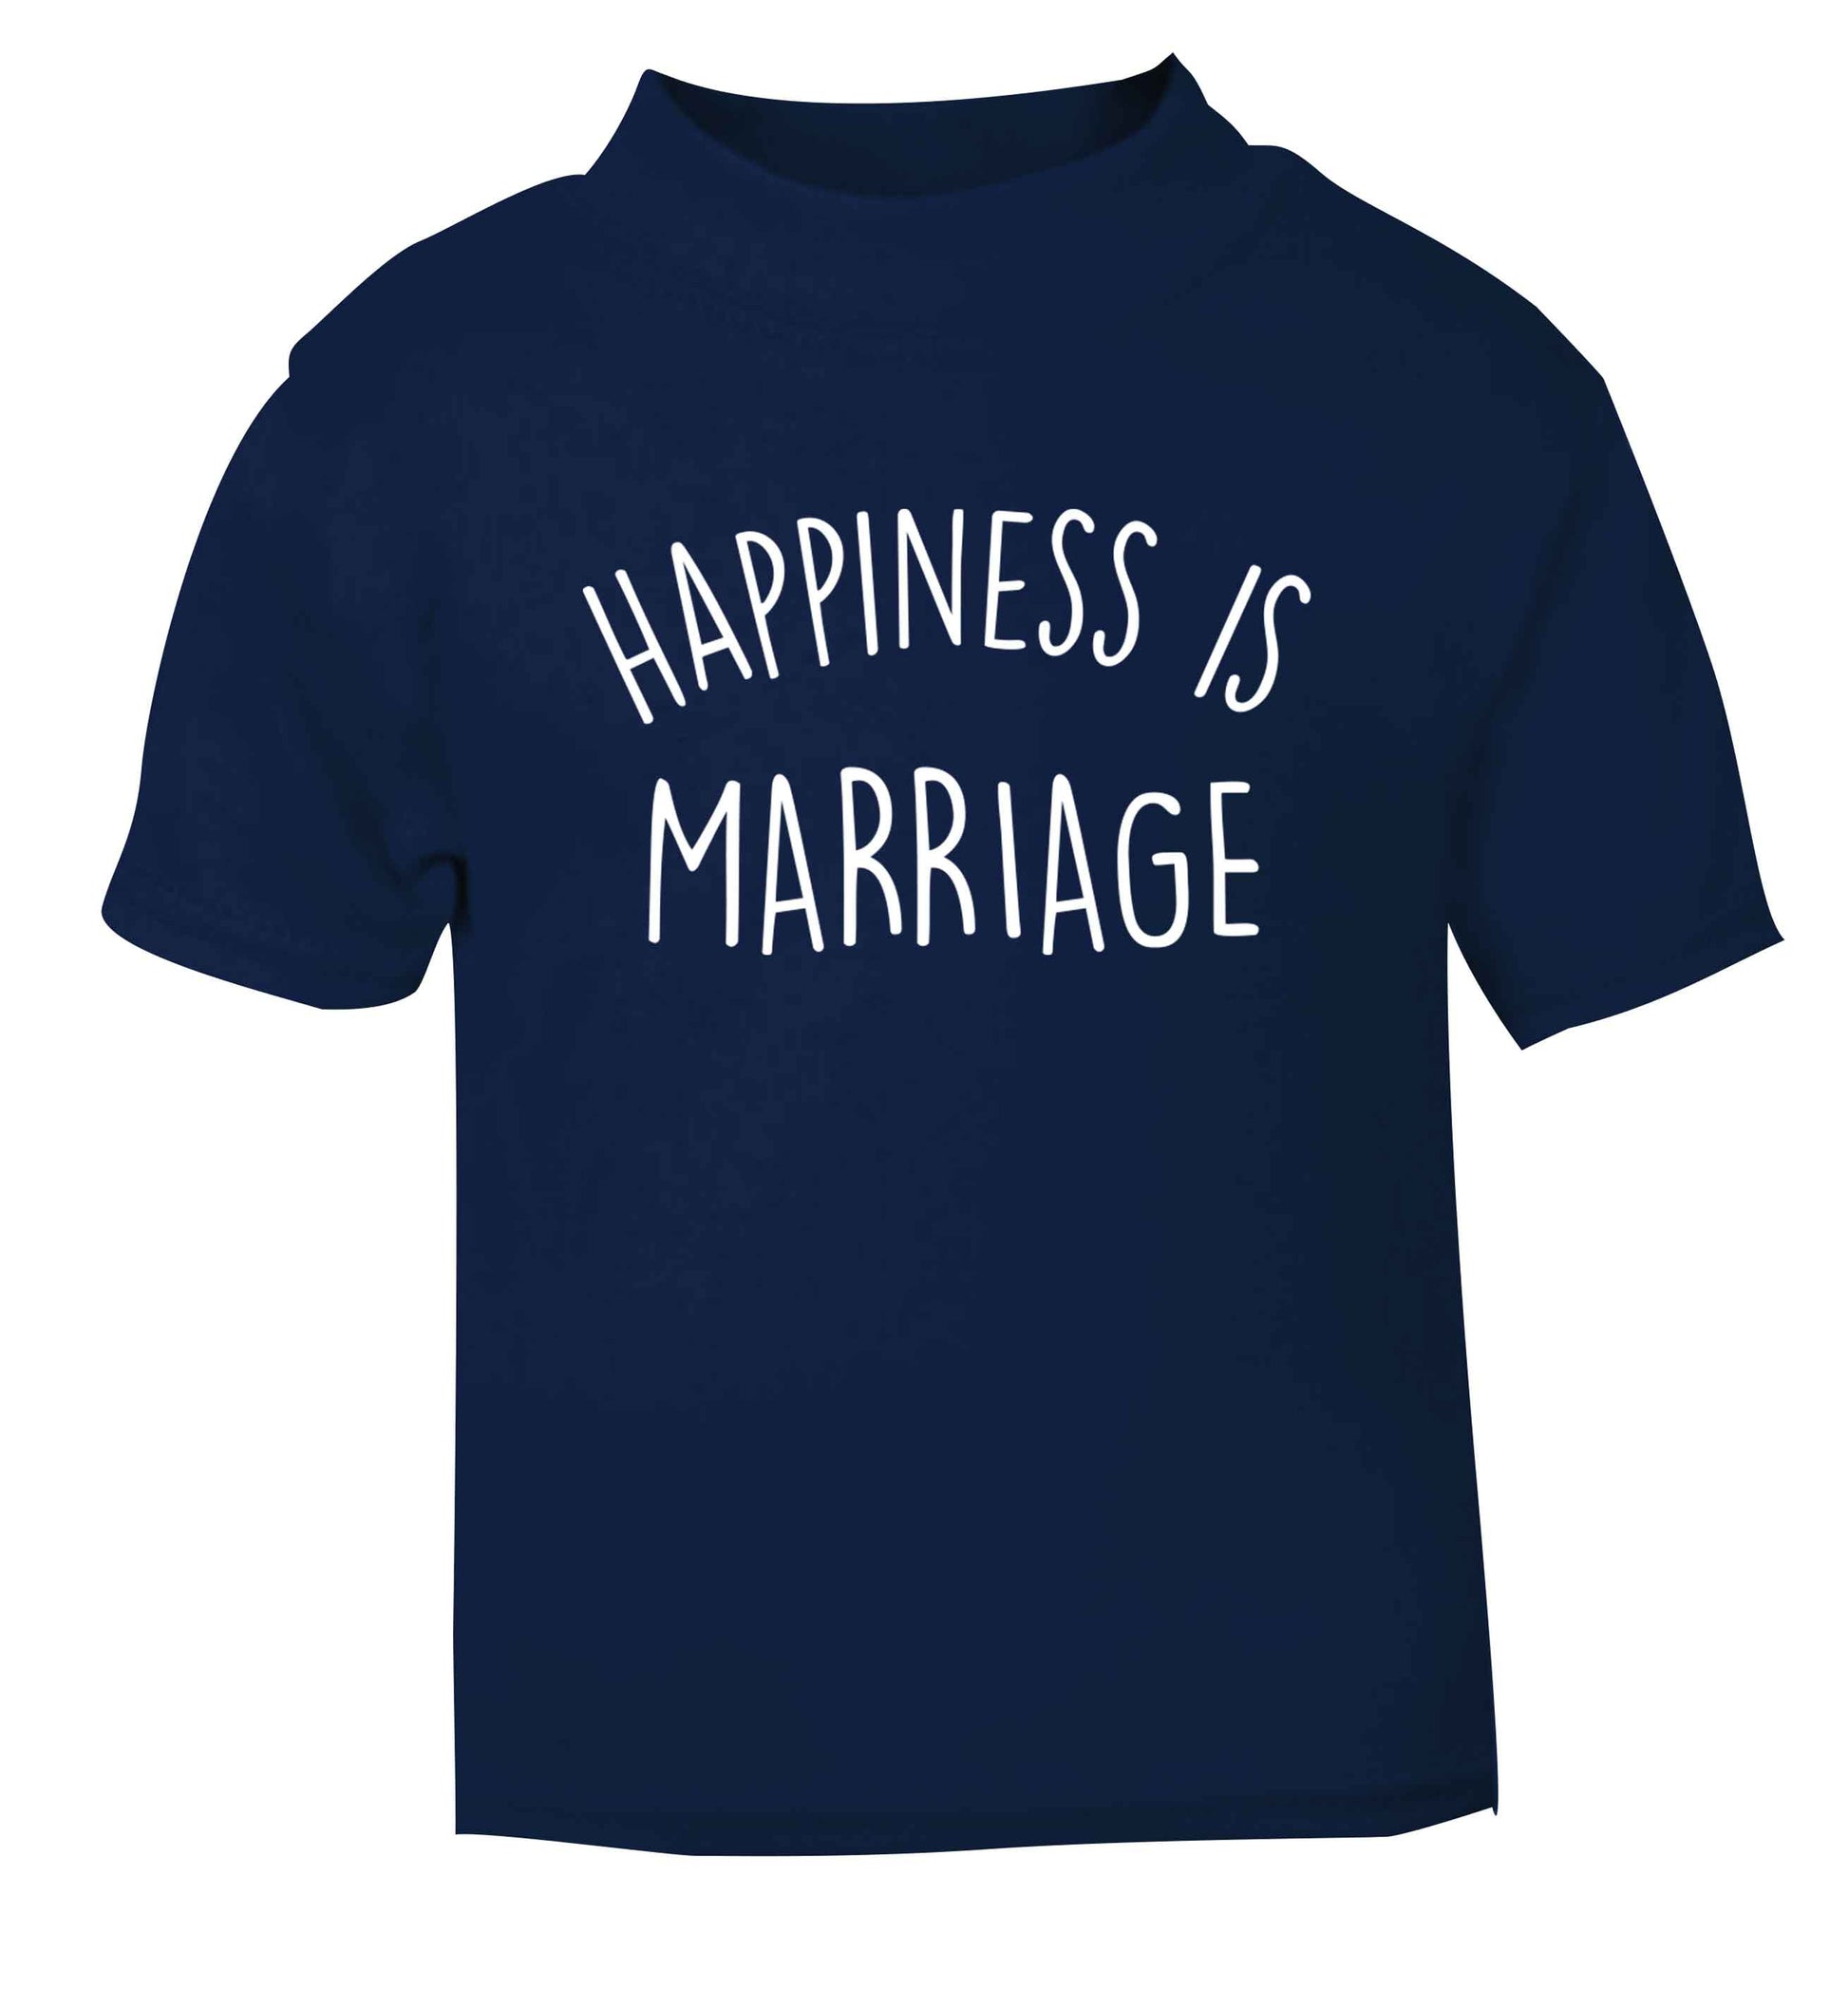 Happiness is wedding planning navy baby toddler Tshirt 2 Years